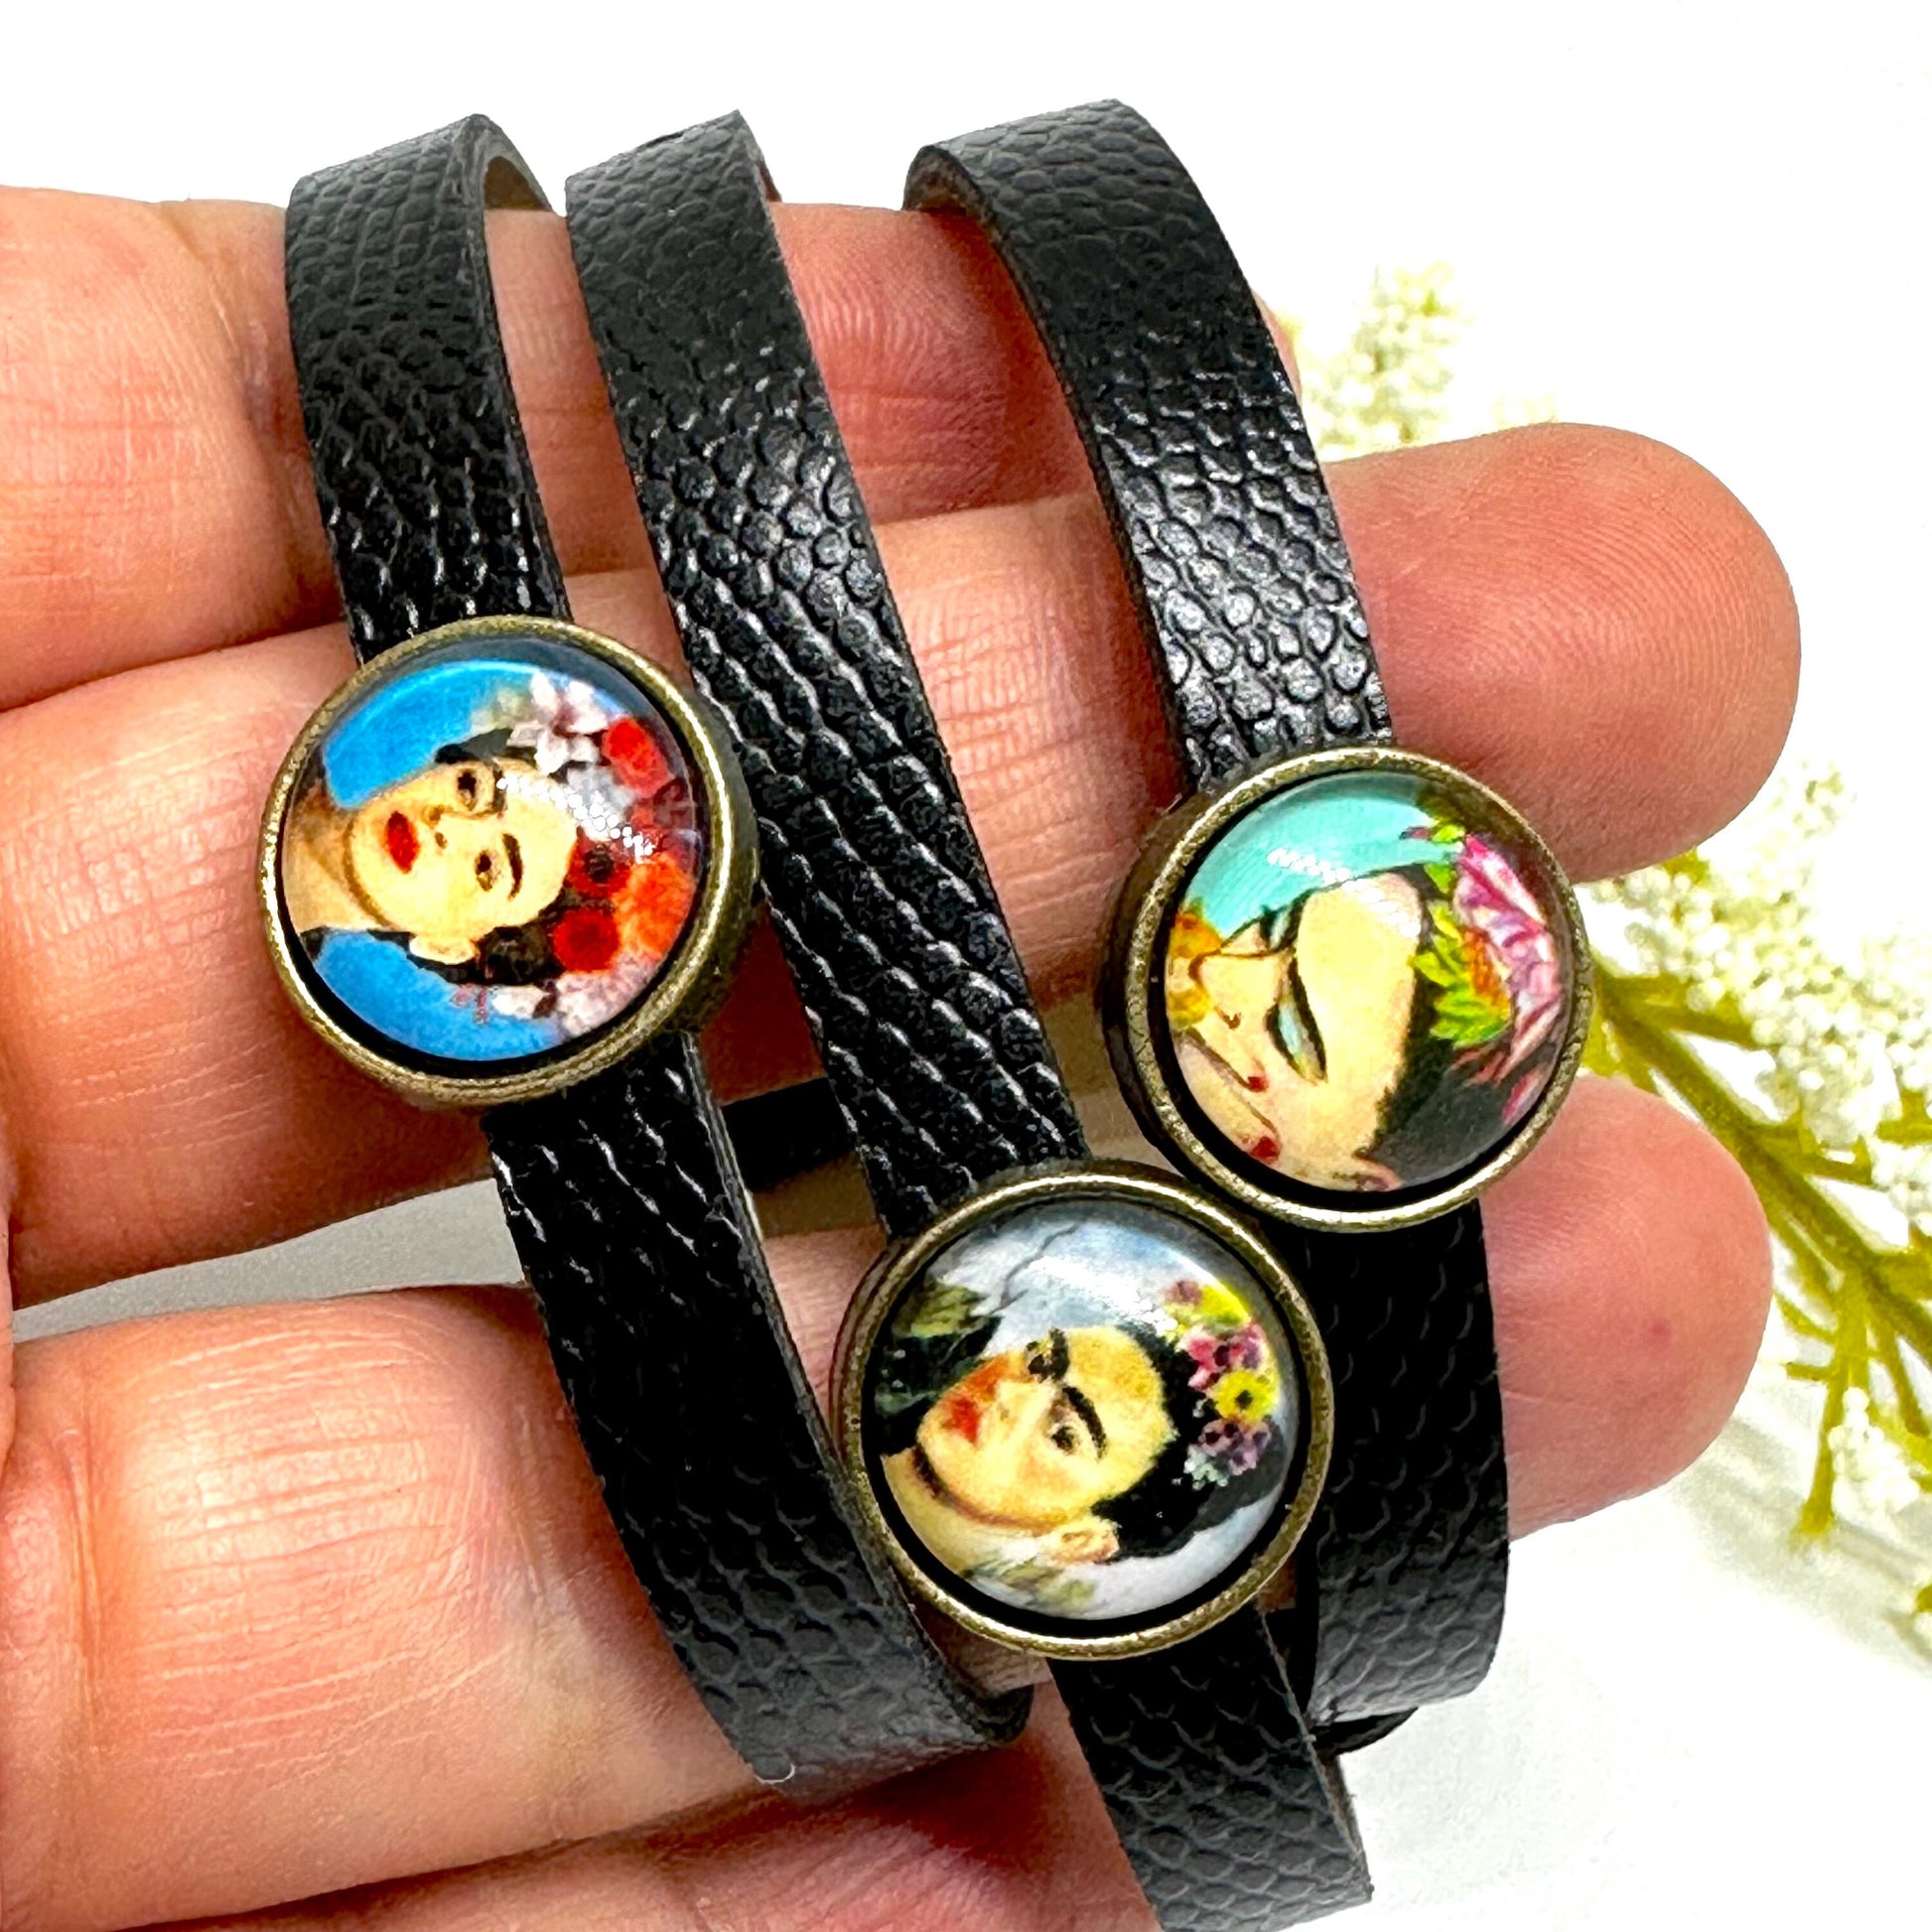 Lovely Frida Inspired Charm Bracelet Set for Girls Casual Fashion Summer Fun Spring Cute Birthday Gift Idea Black Leather Adjustable Straps